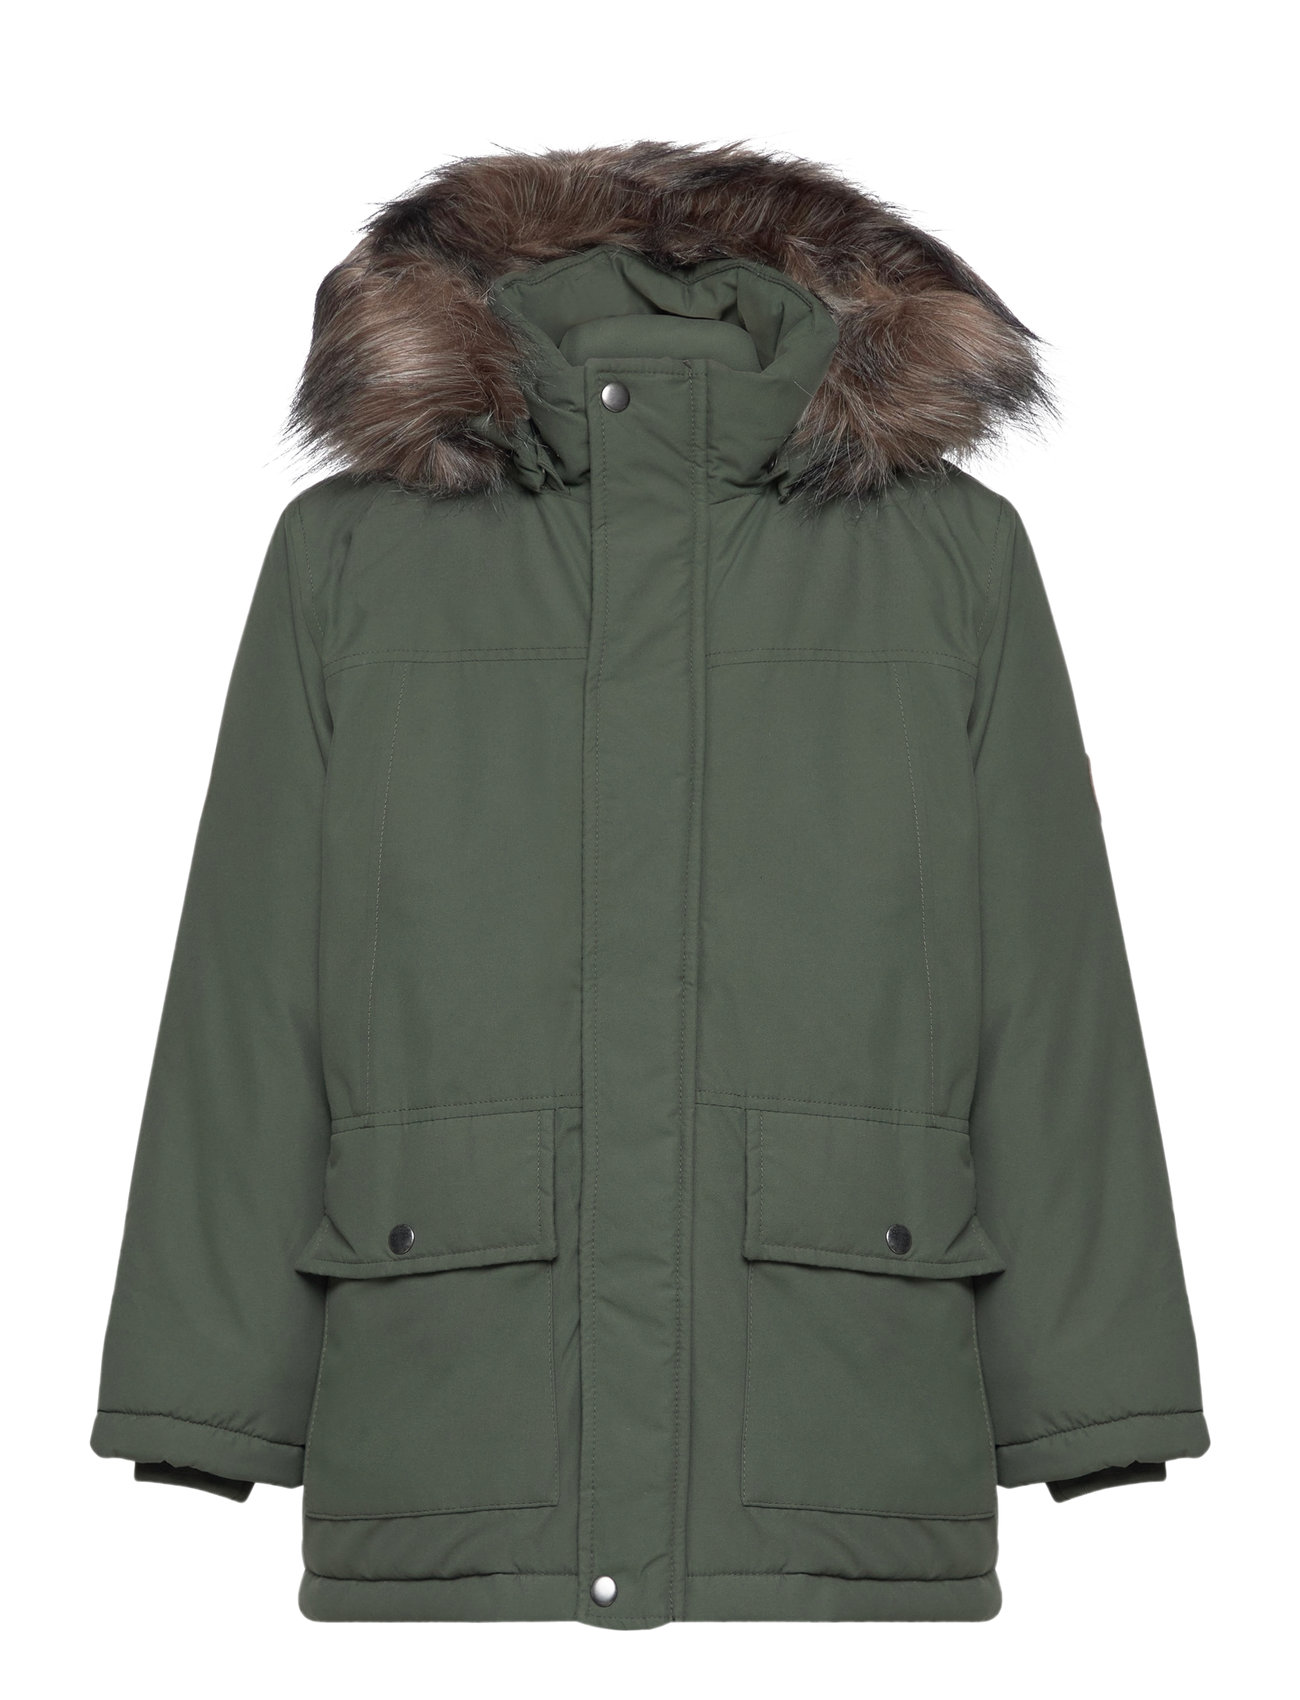 name it Nkmmarlin Parka Jacket Pb Fo - 27.50 €. Buy Parkas from name it  online at Boozt.com. Fast delivery and easy returns